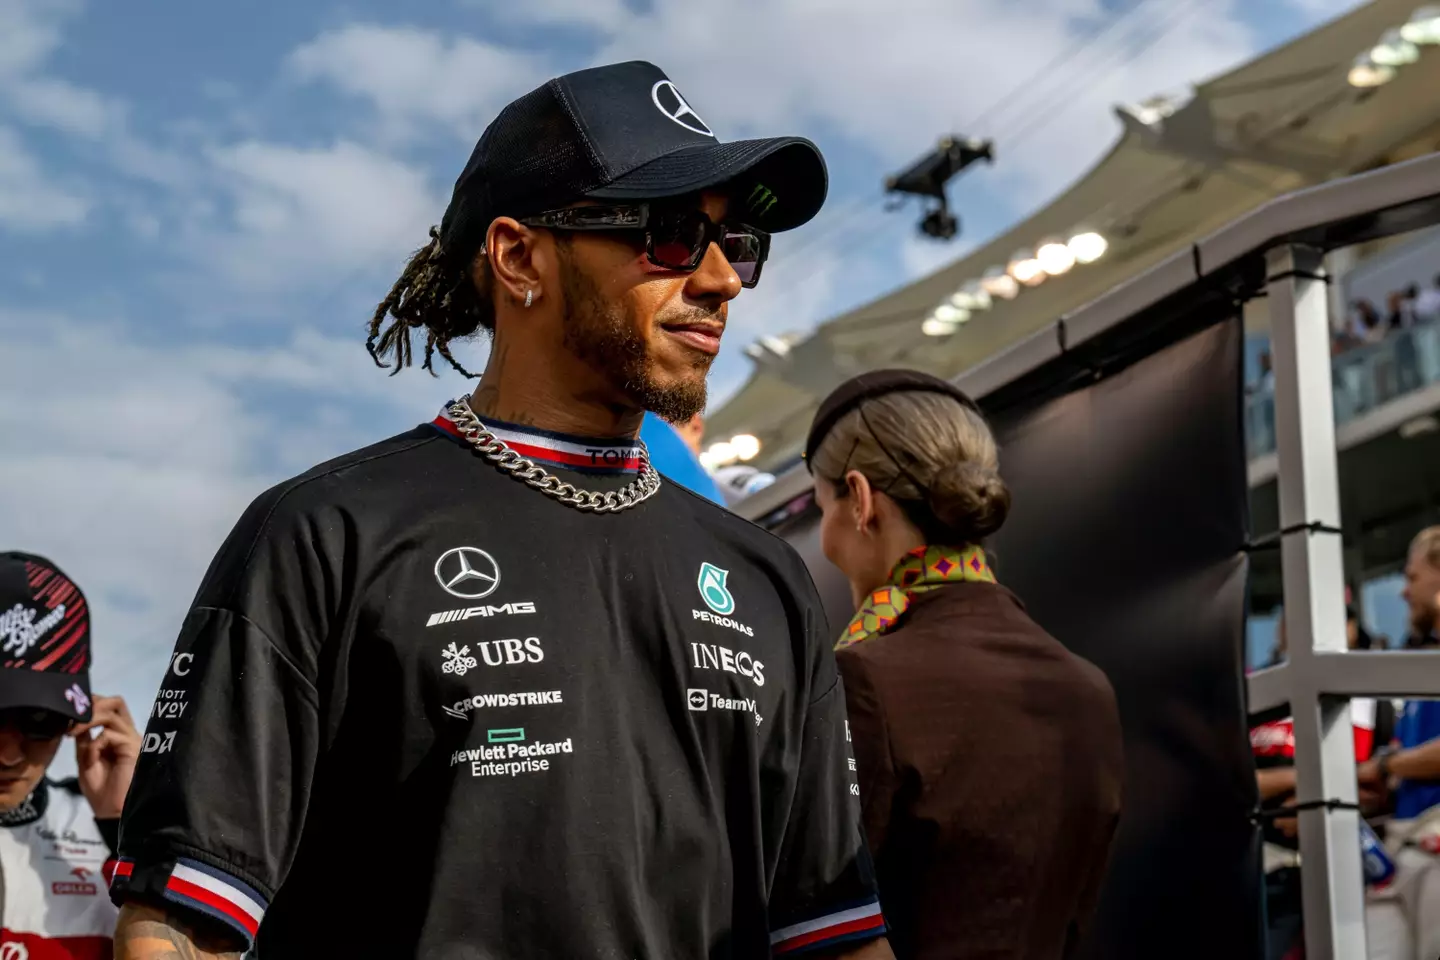 Hamilton's overtake on Verstappen was deemed legal by the stewards. Image: Alamy